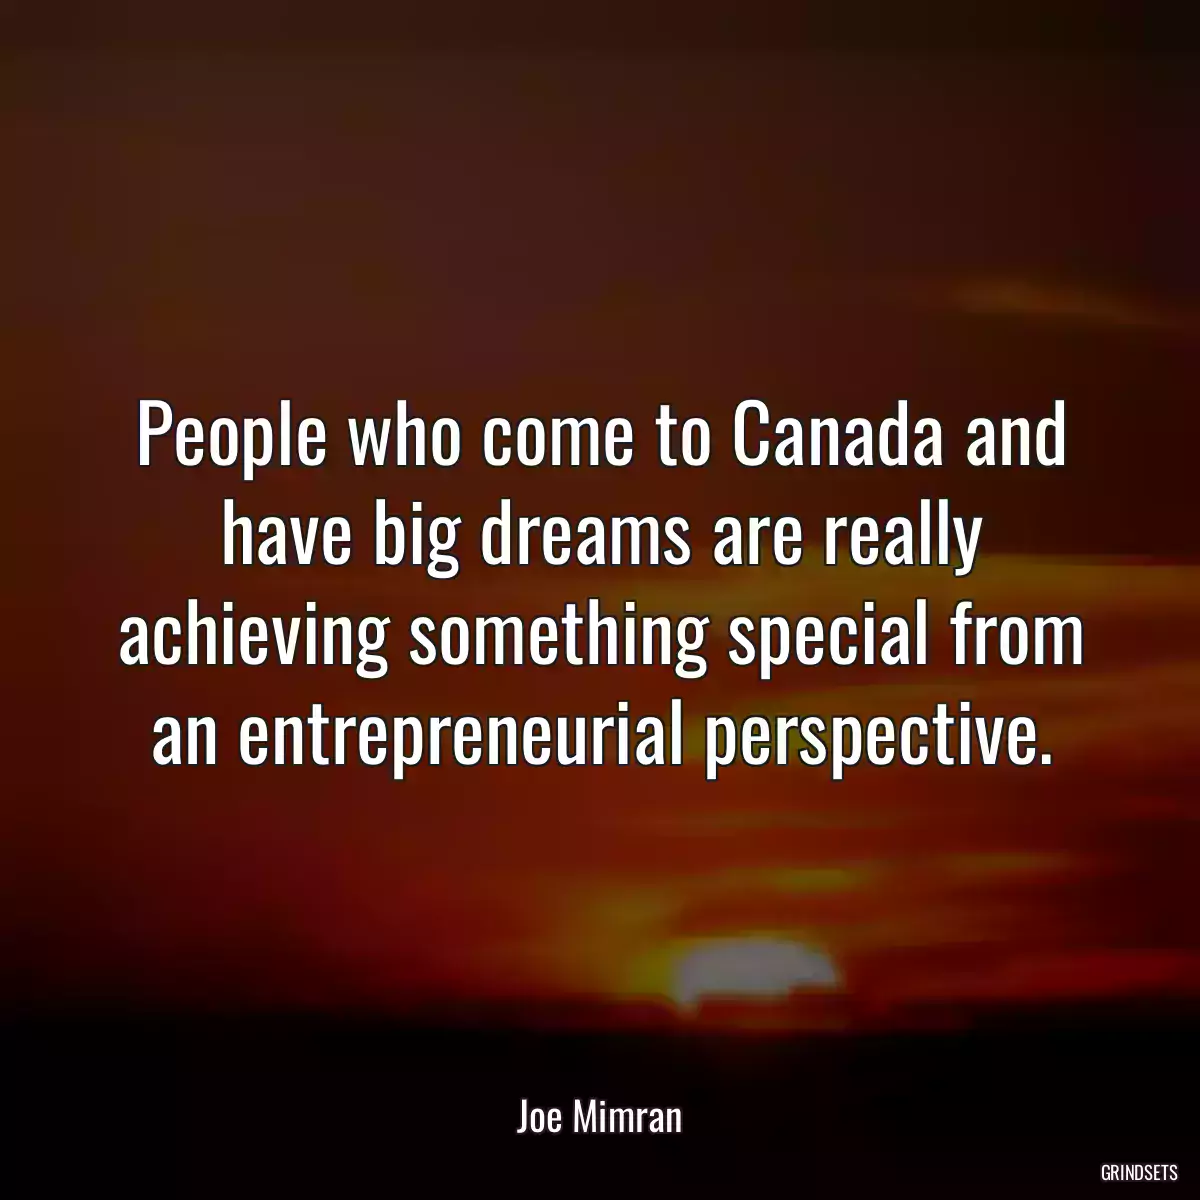 People who come to Canada and have big dreams are really achieving something special from an entrepreneurial perspective.